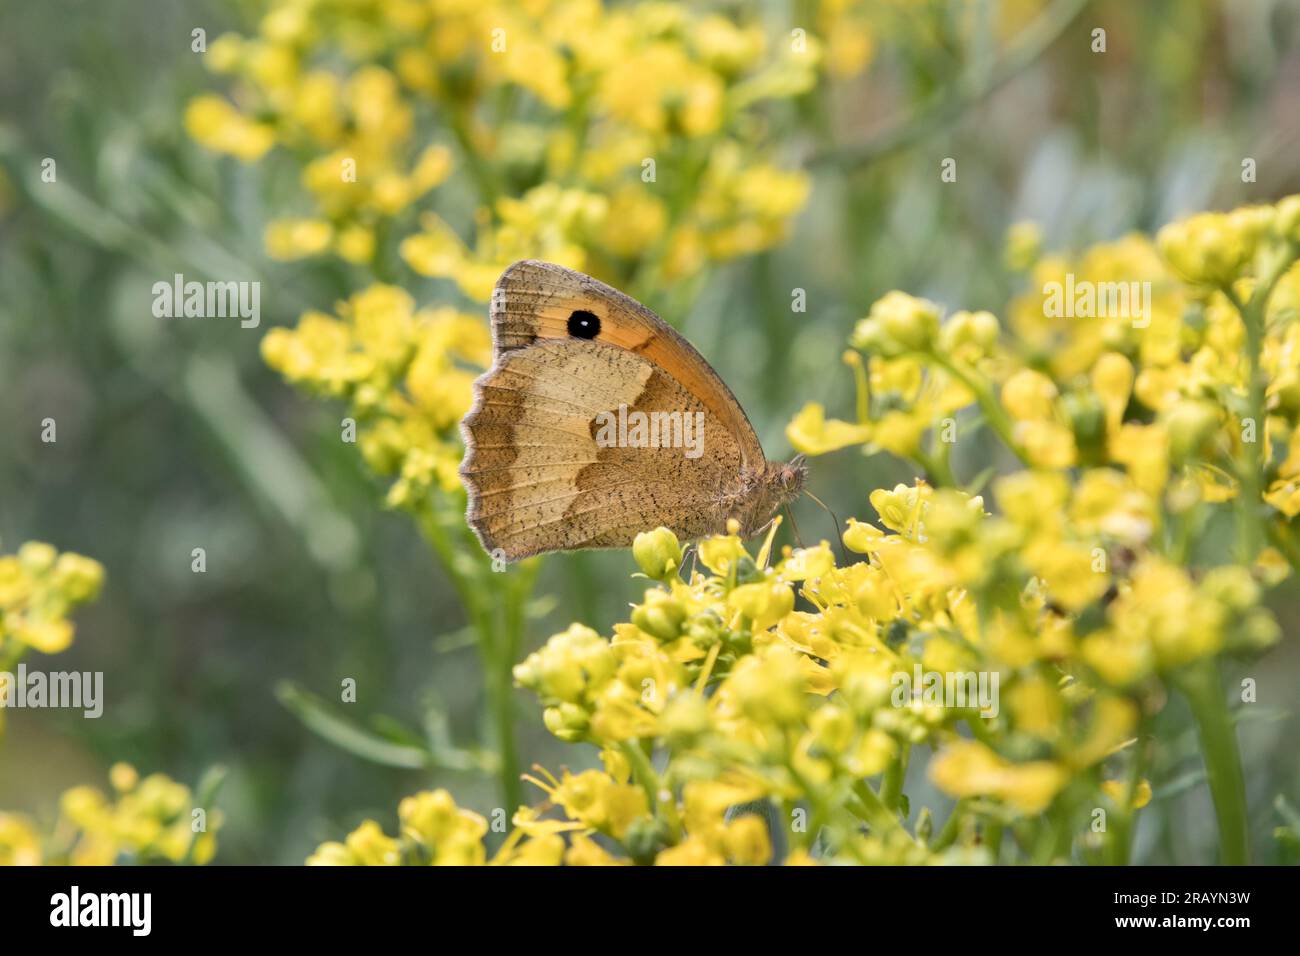 Gatekeeper (Pyronia tithonus) Butterfly, nota anche come Hedge Brown Butterfly. Foto Stock